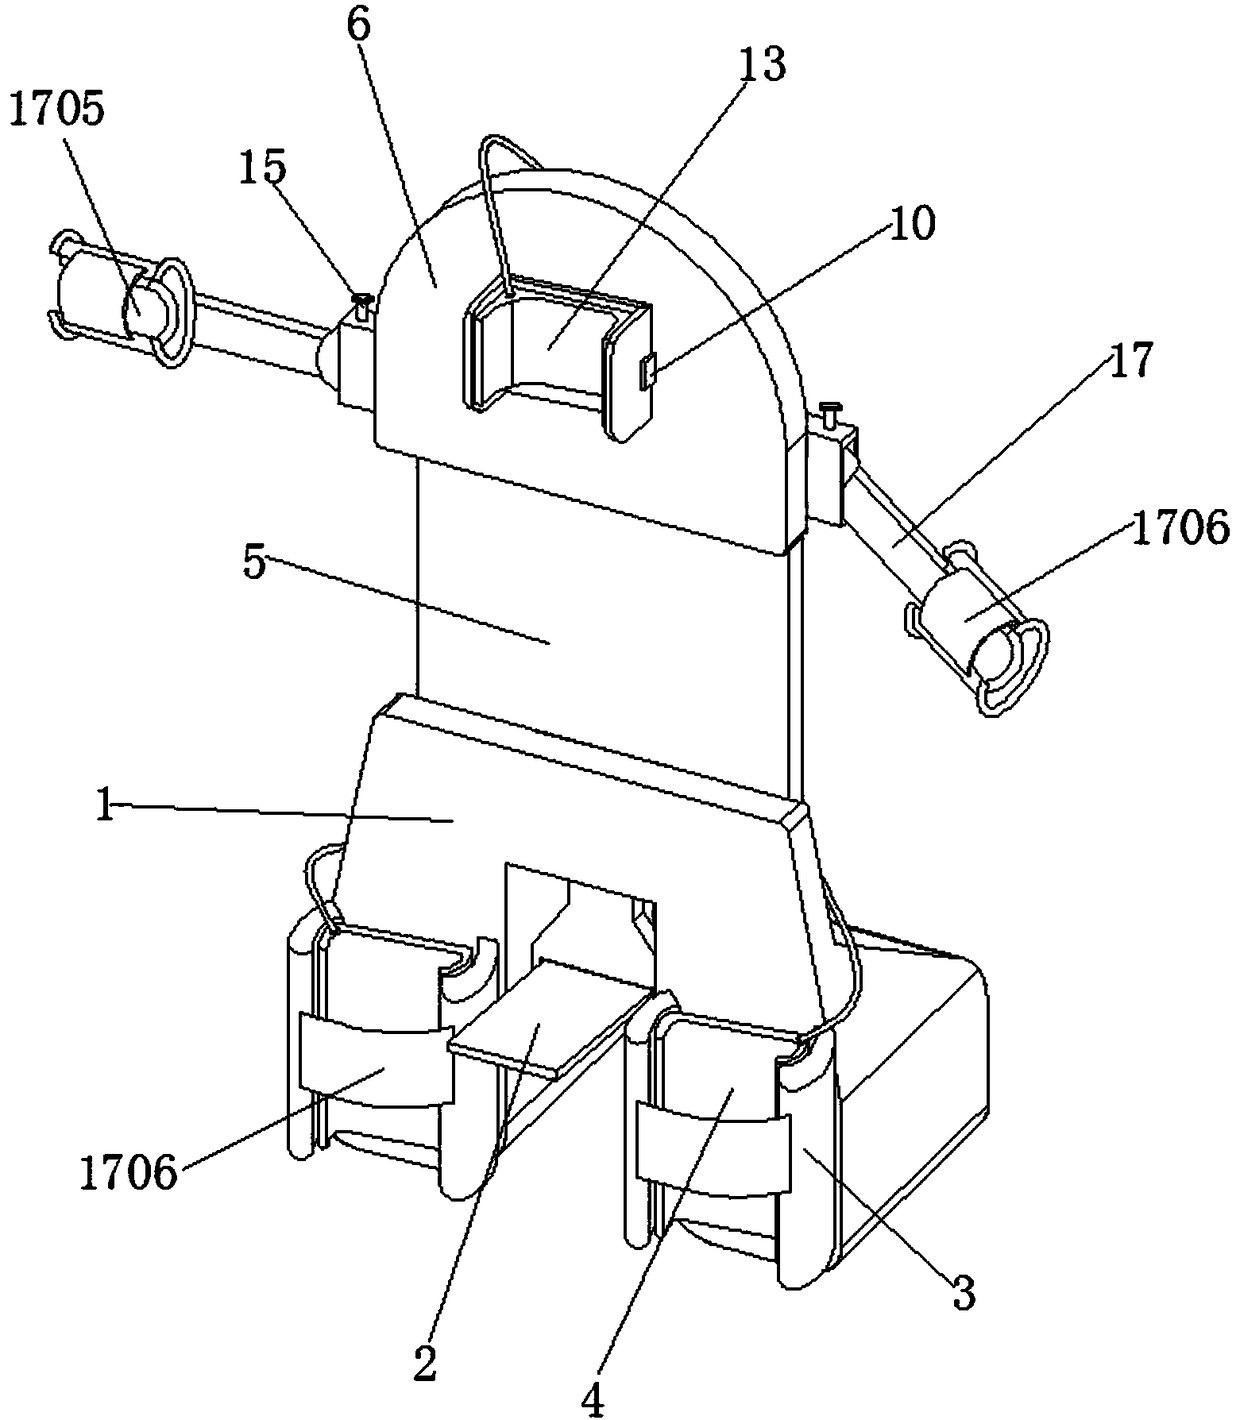 Fixing device for constraining body position of cerebral palsy child